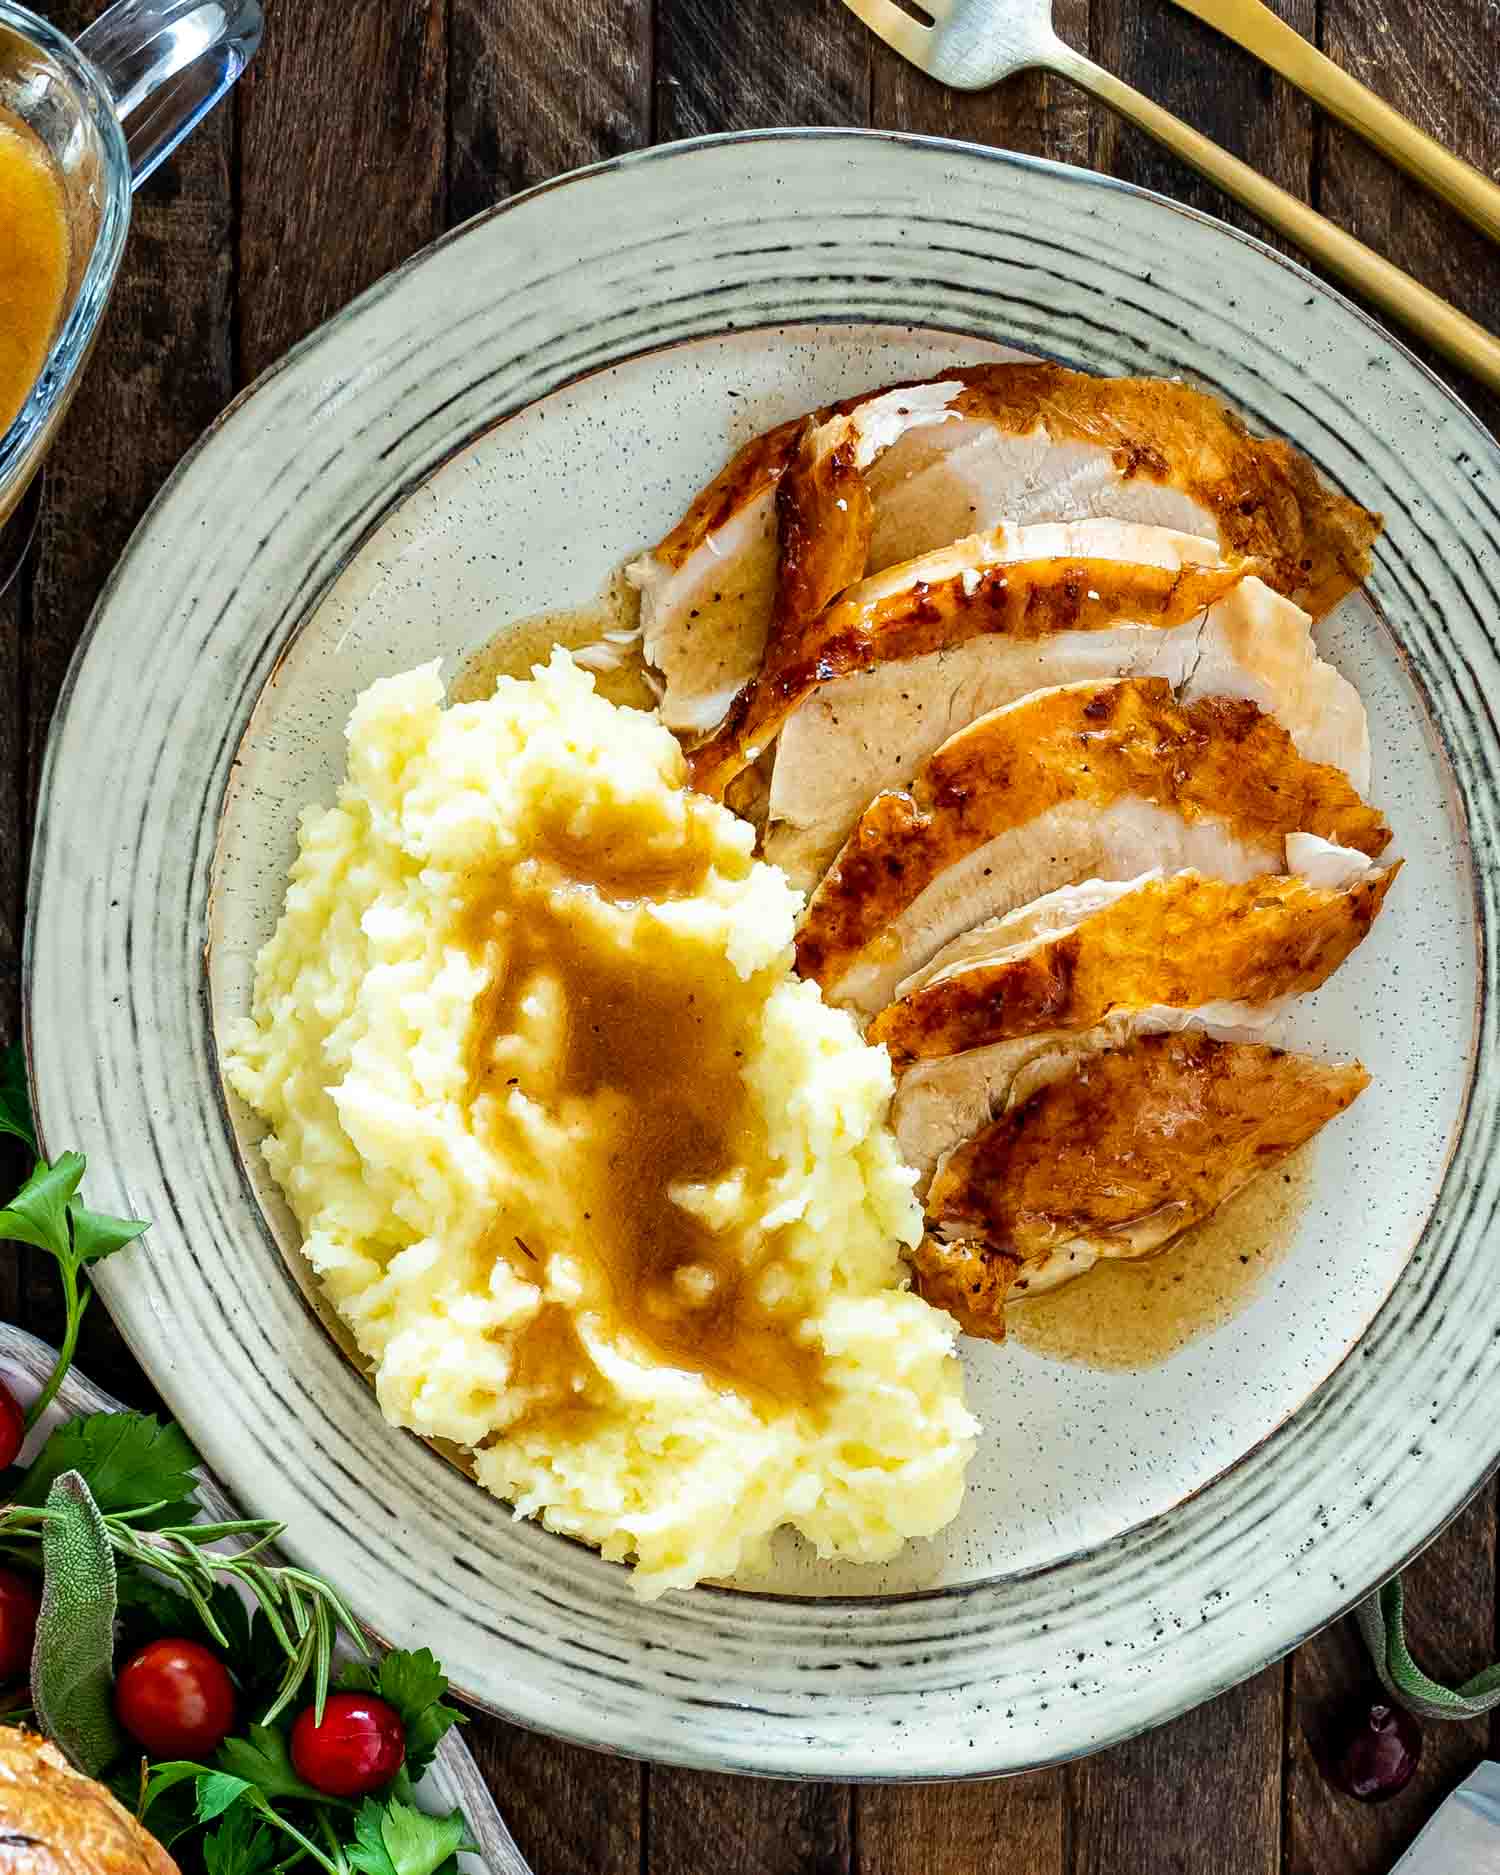 turkey breast sliced up with mashed potatoes and gravy on a plate.